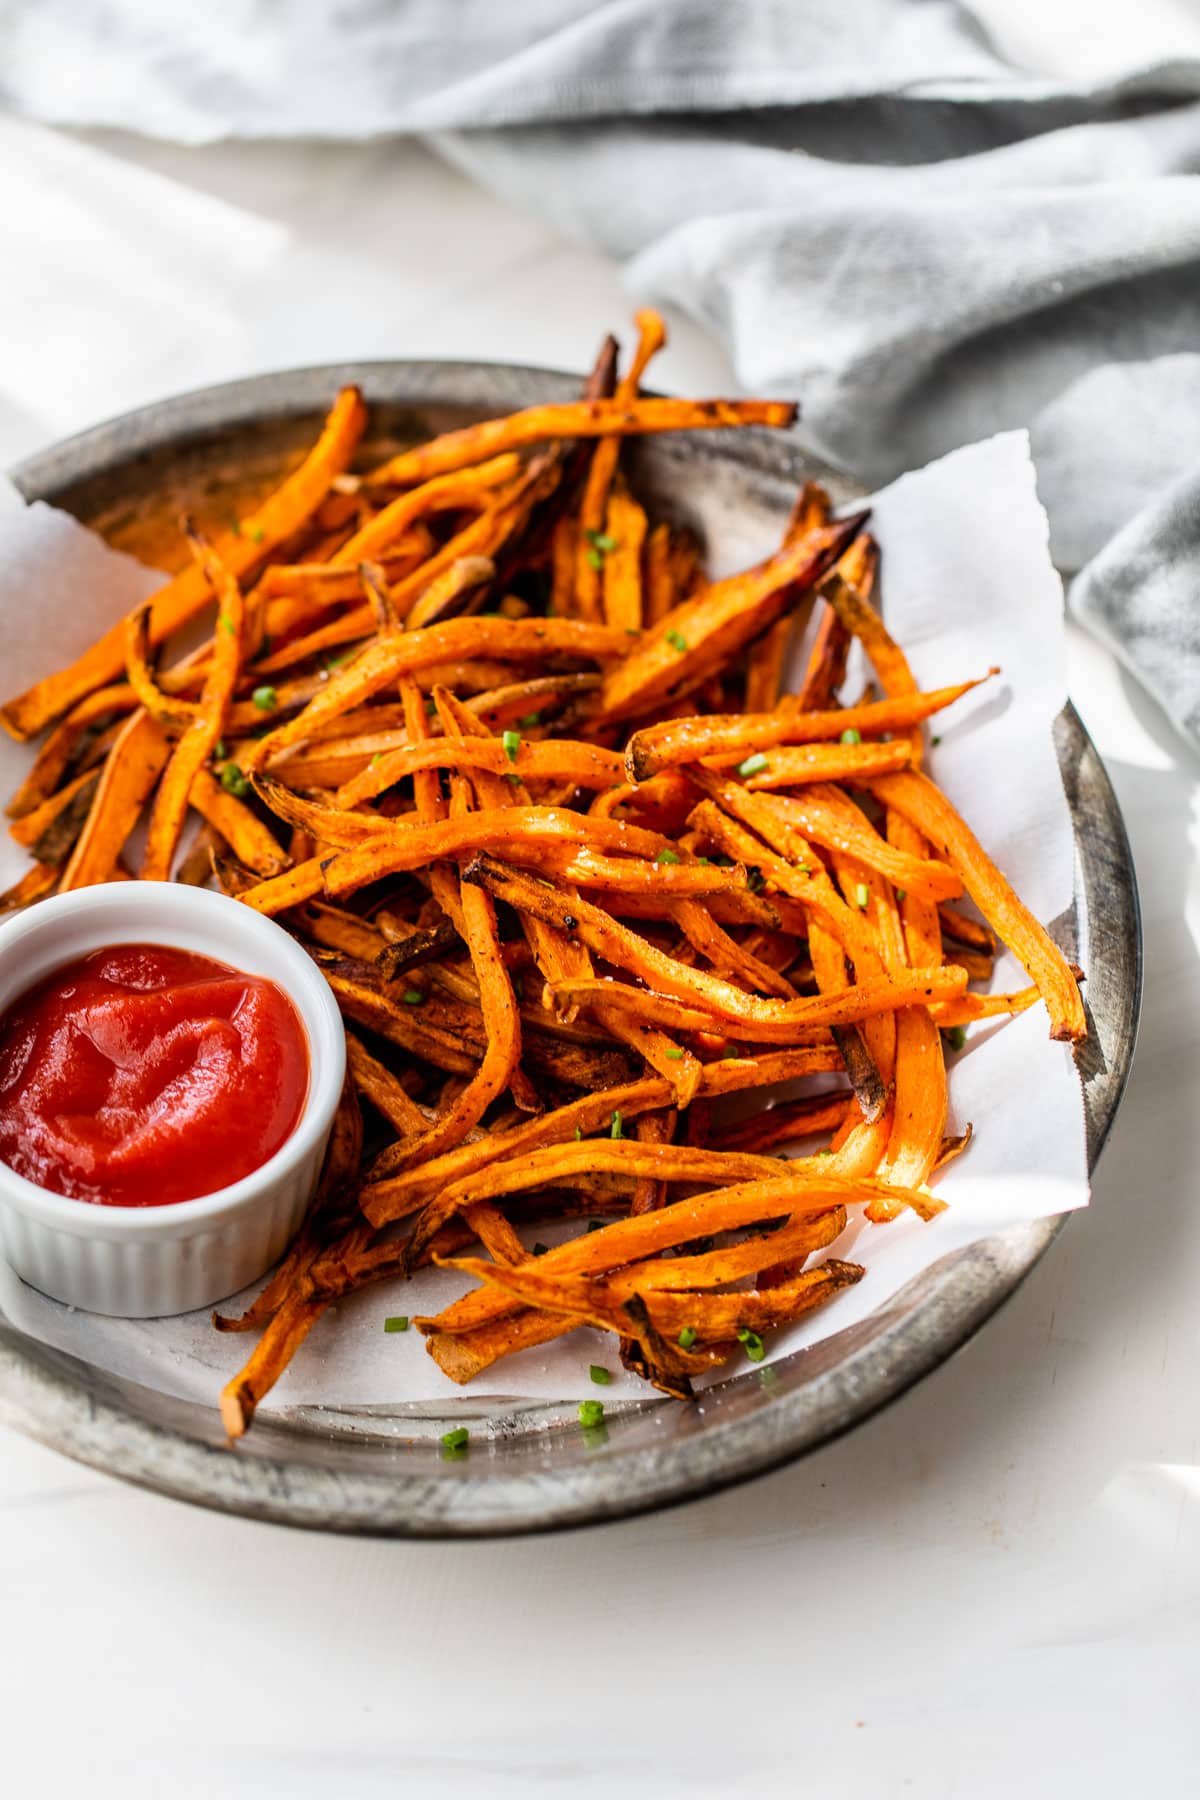 crispy air fryer sweet potato fries on a plate with small bowl of ketchup